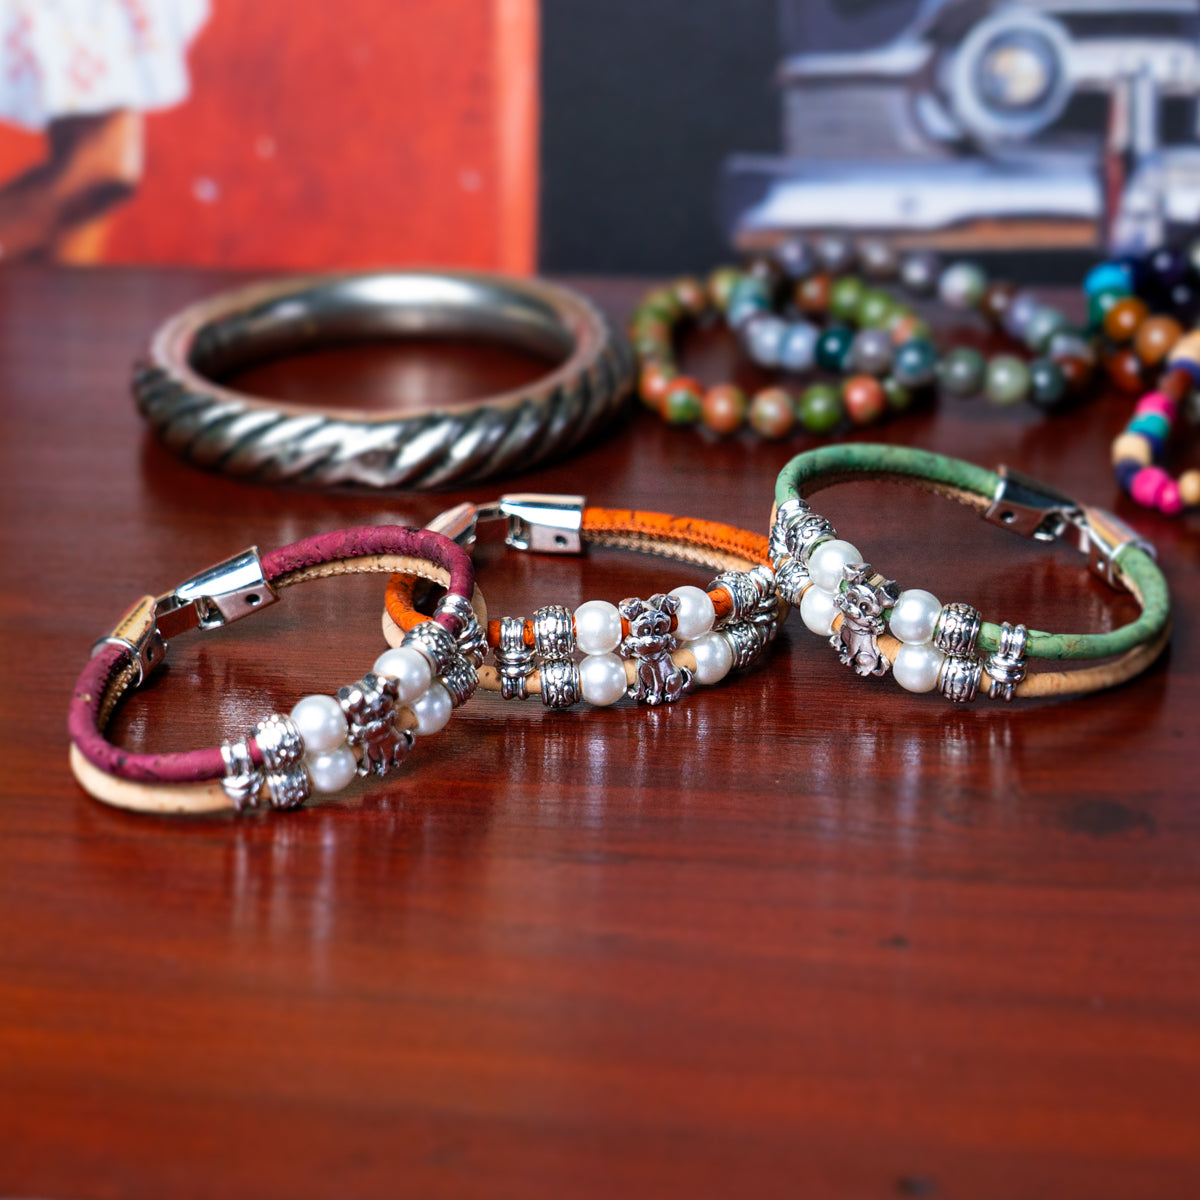 3MM rRound Colorful Cork Cord w/ Dog Alloy Accessories Handmade Women's Bracelet  BR-443-MIX-5